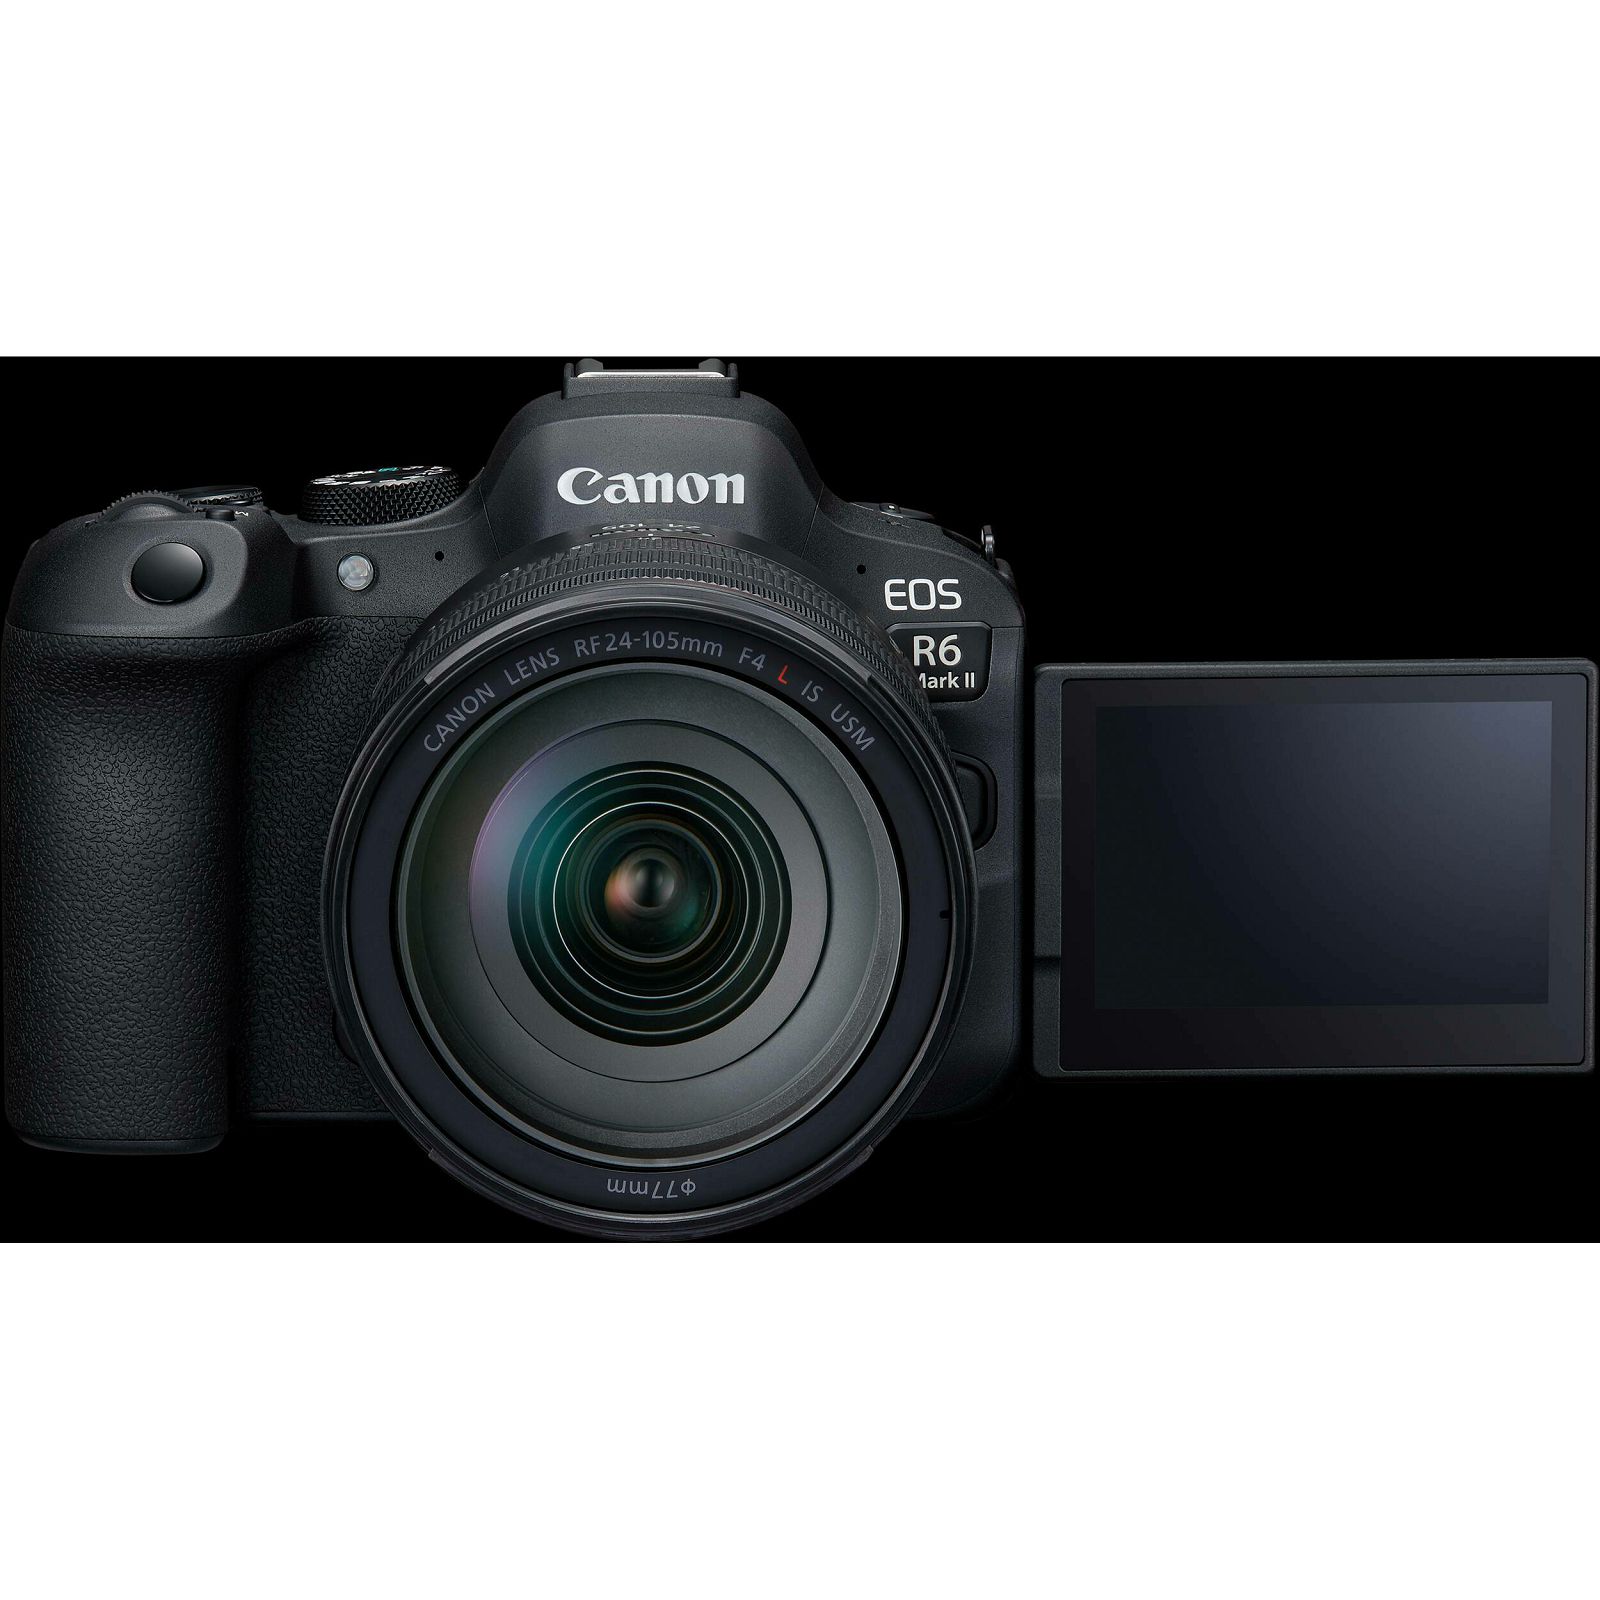 Canon EOS R6 II + RF 10-20mm f/4 L IS STM